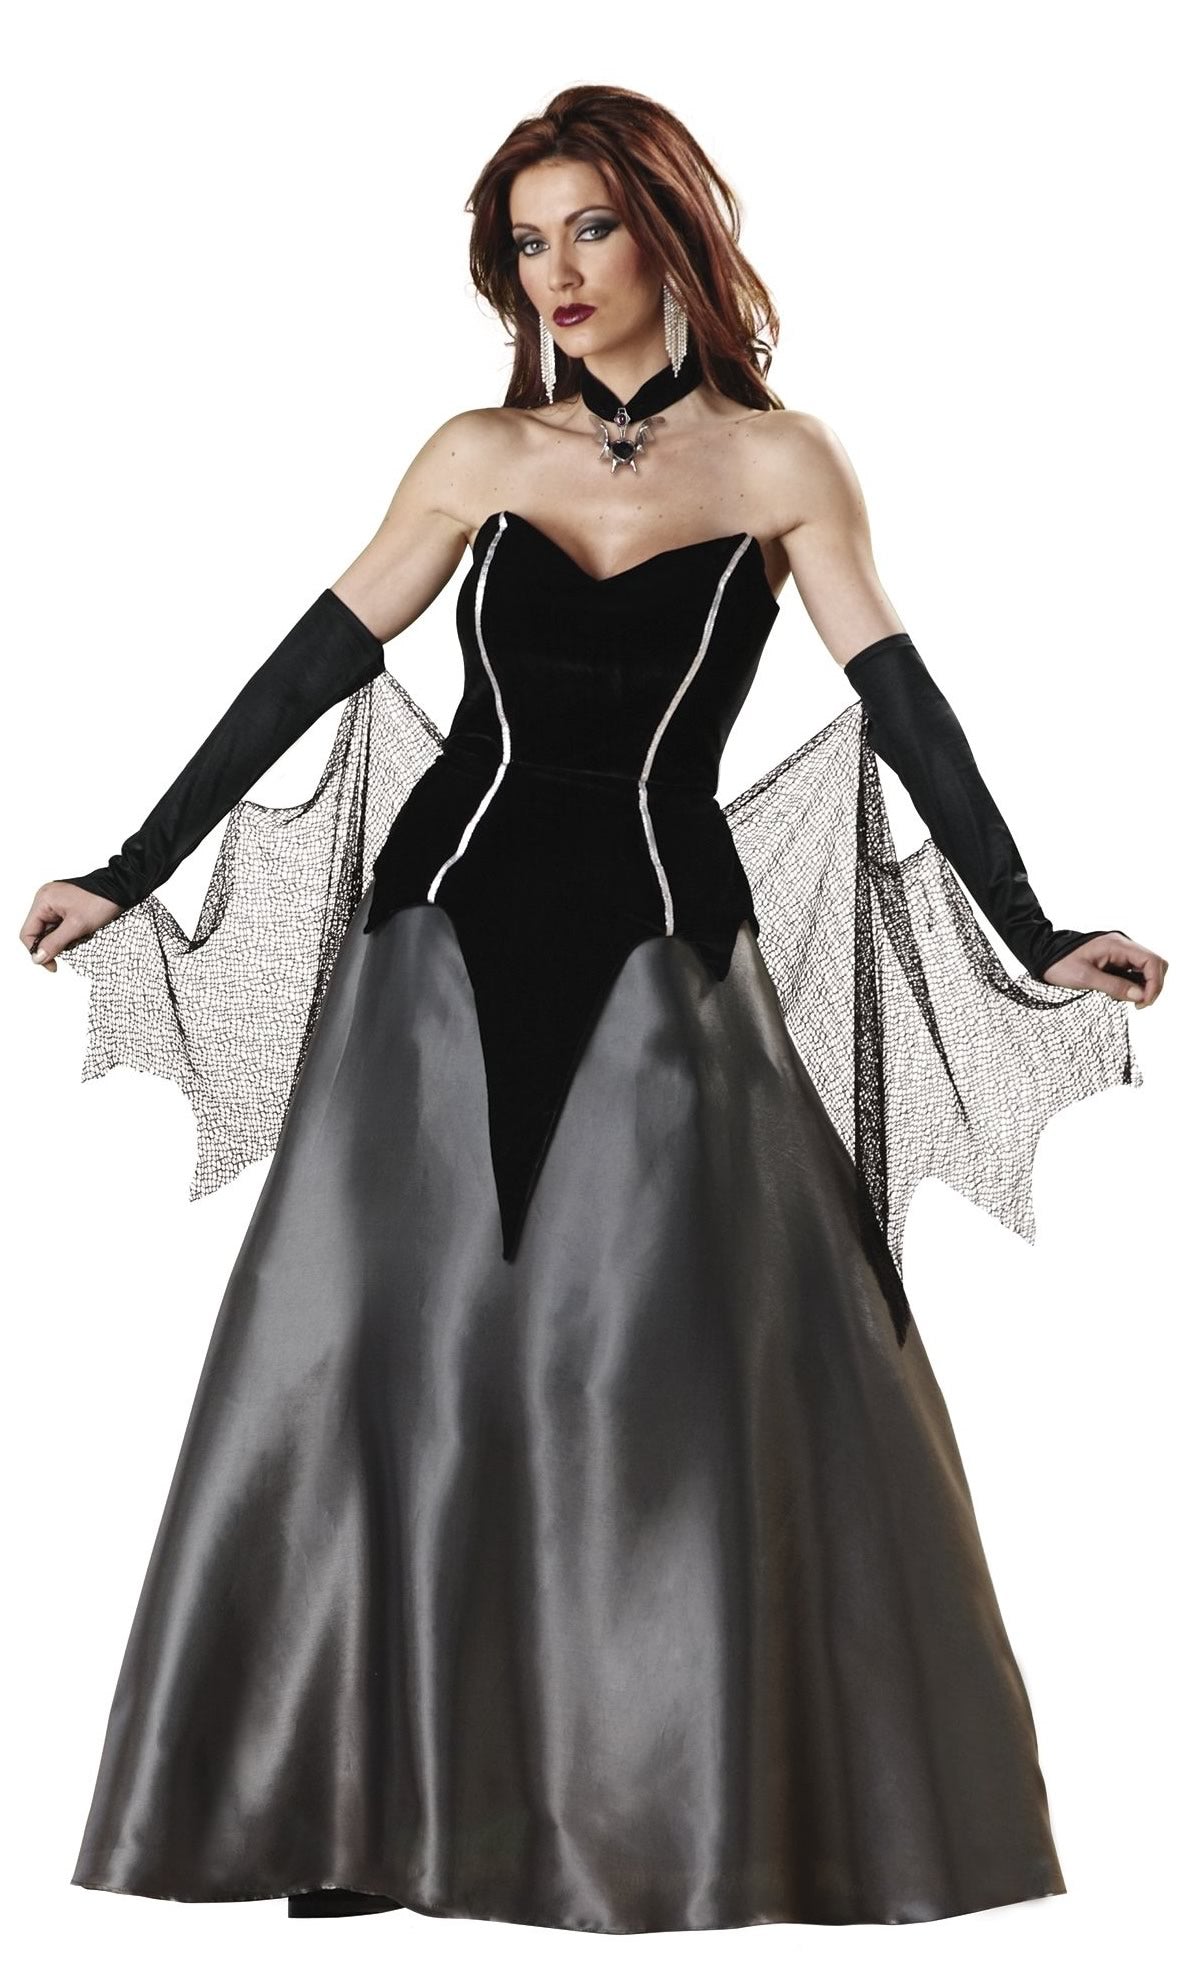 Bat gown in grey and black with gloves, mesh cape and petticoat